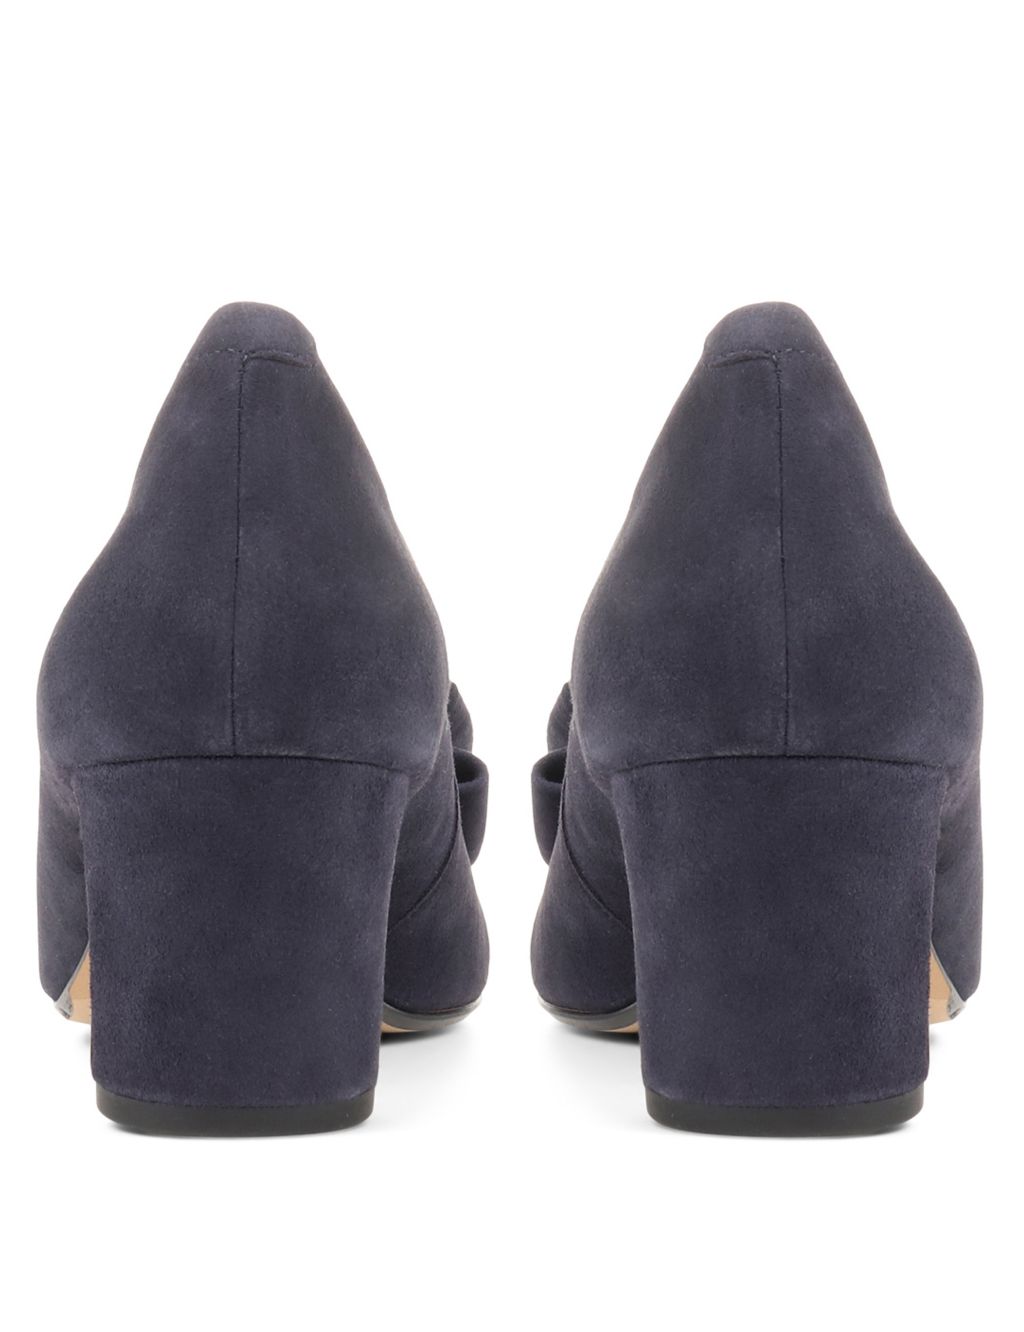 Suede Bow Block Heel Court Shoes image 4